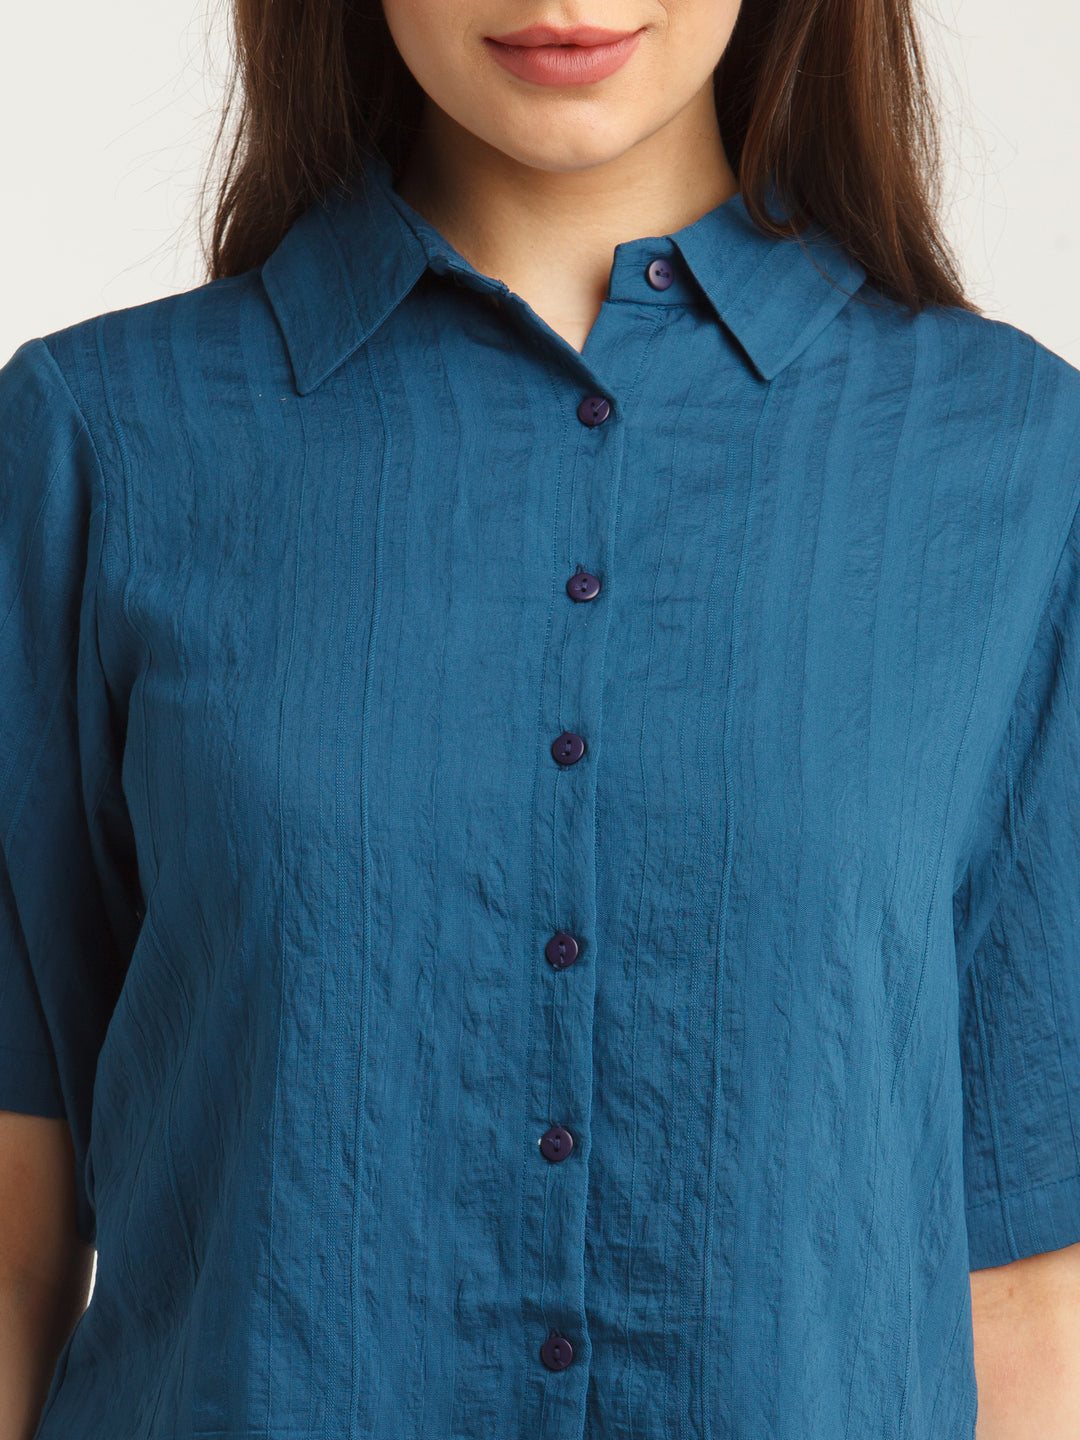 Navy Blue Solid Shirt For Women